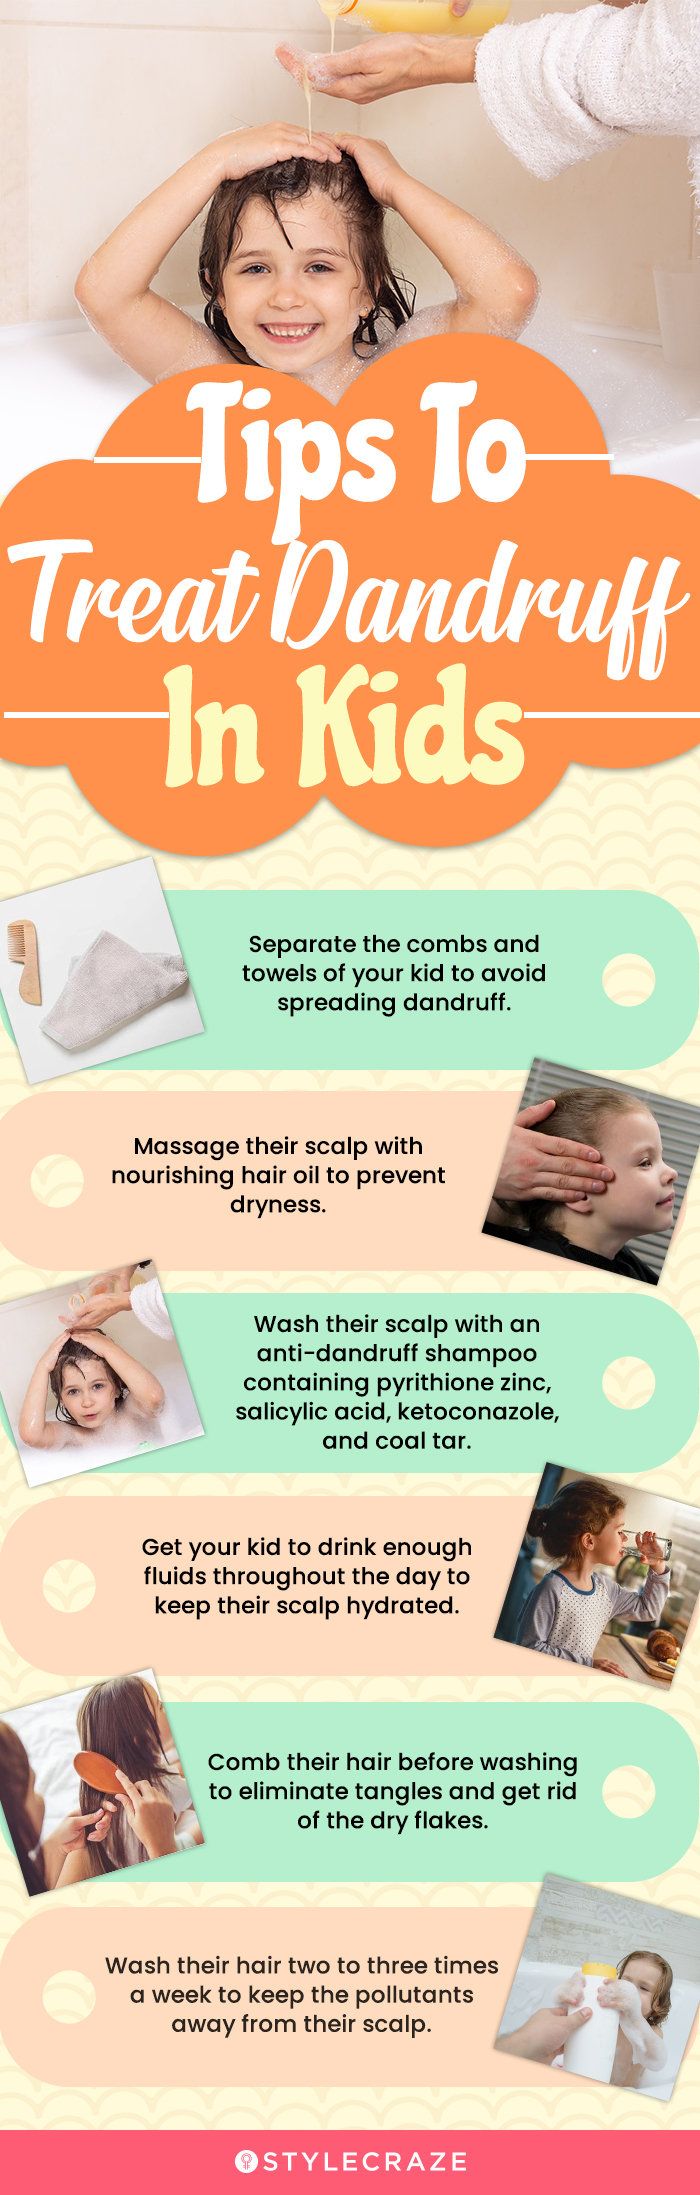 Tips To Treat Dandruff In Kids (infographic)